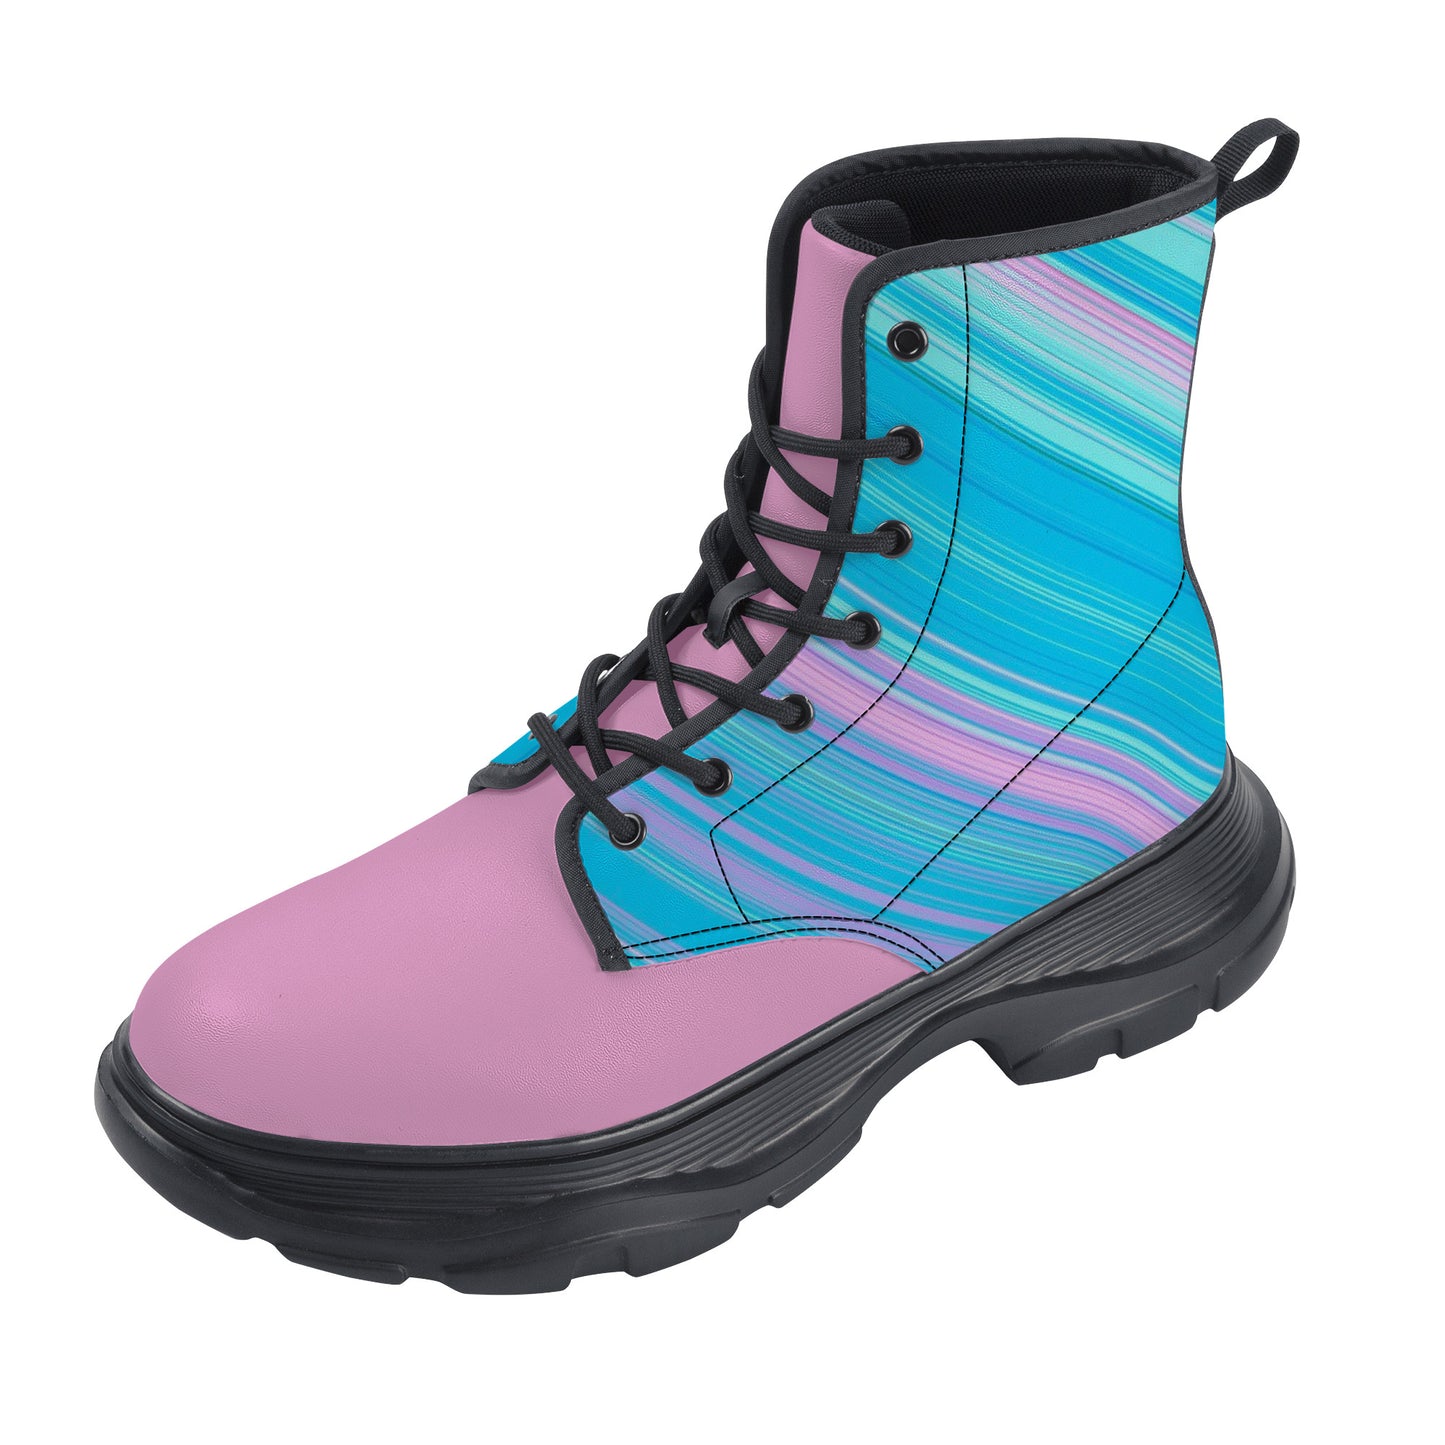 Unisex Chunky Boots - Blue/Pink